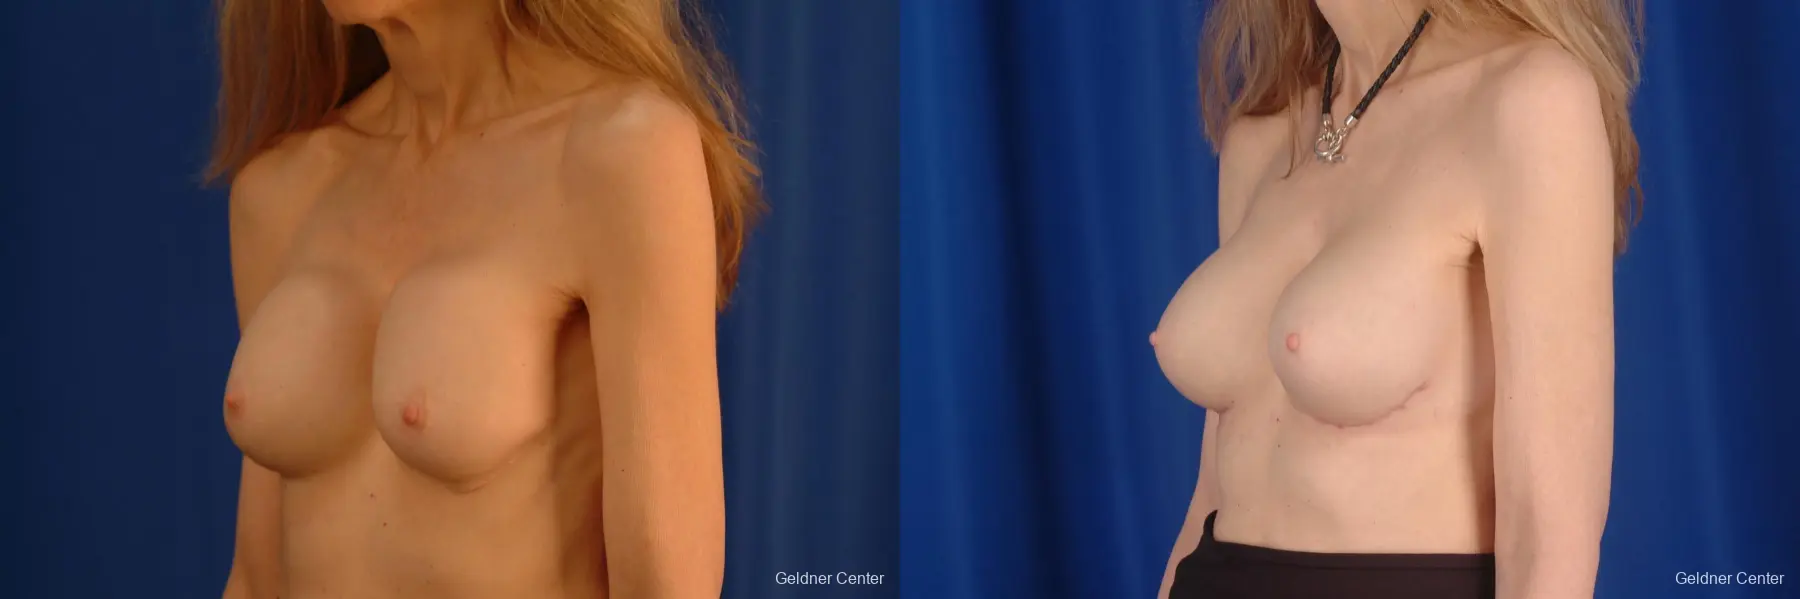 Complex Breast Augmentation Hinsdale, Chicago 2398 - Before and After 5